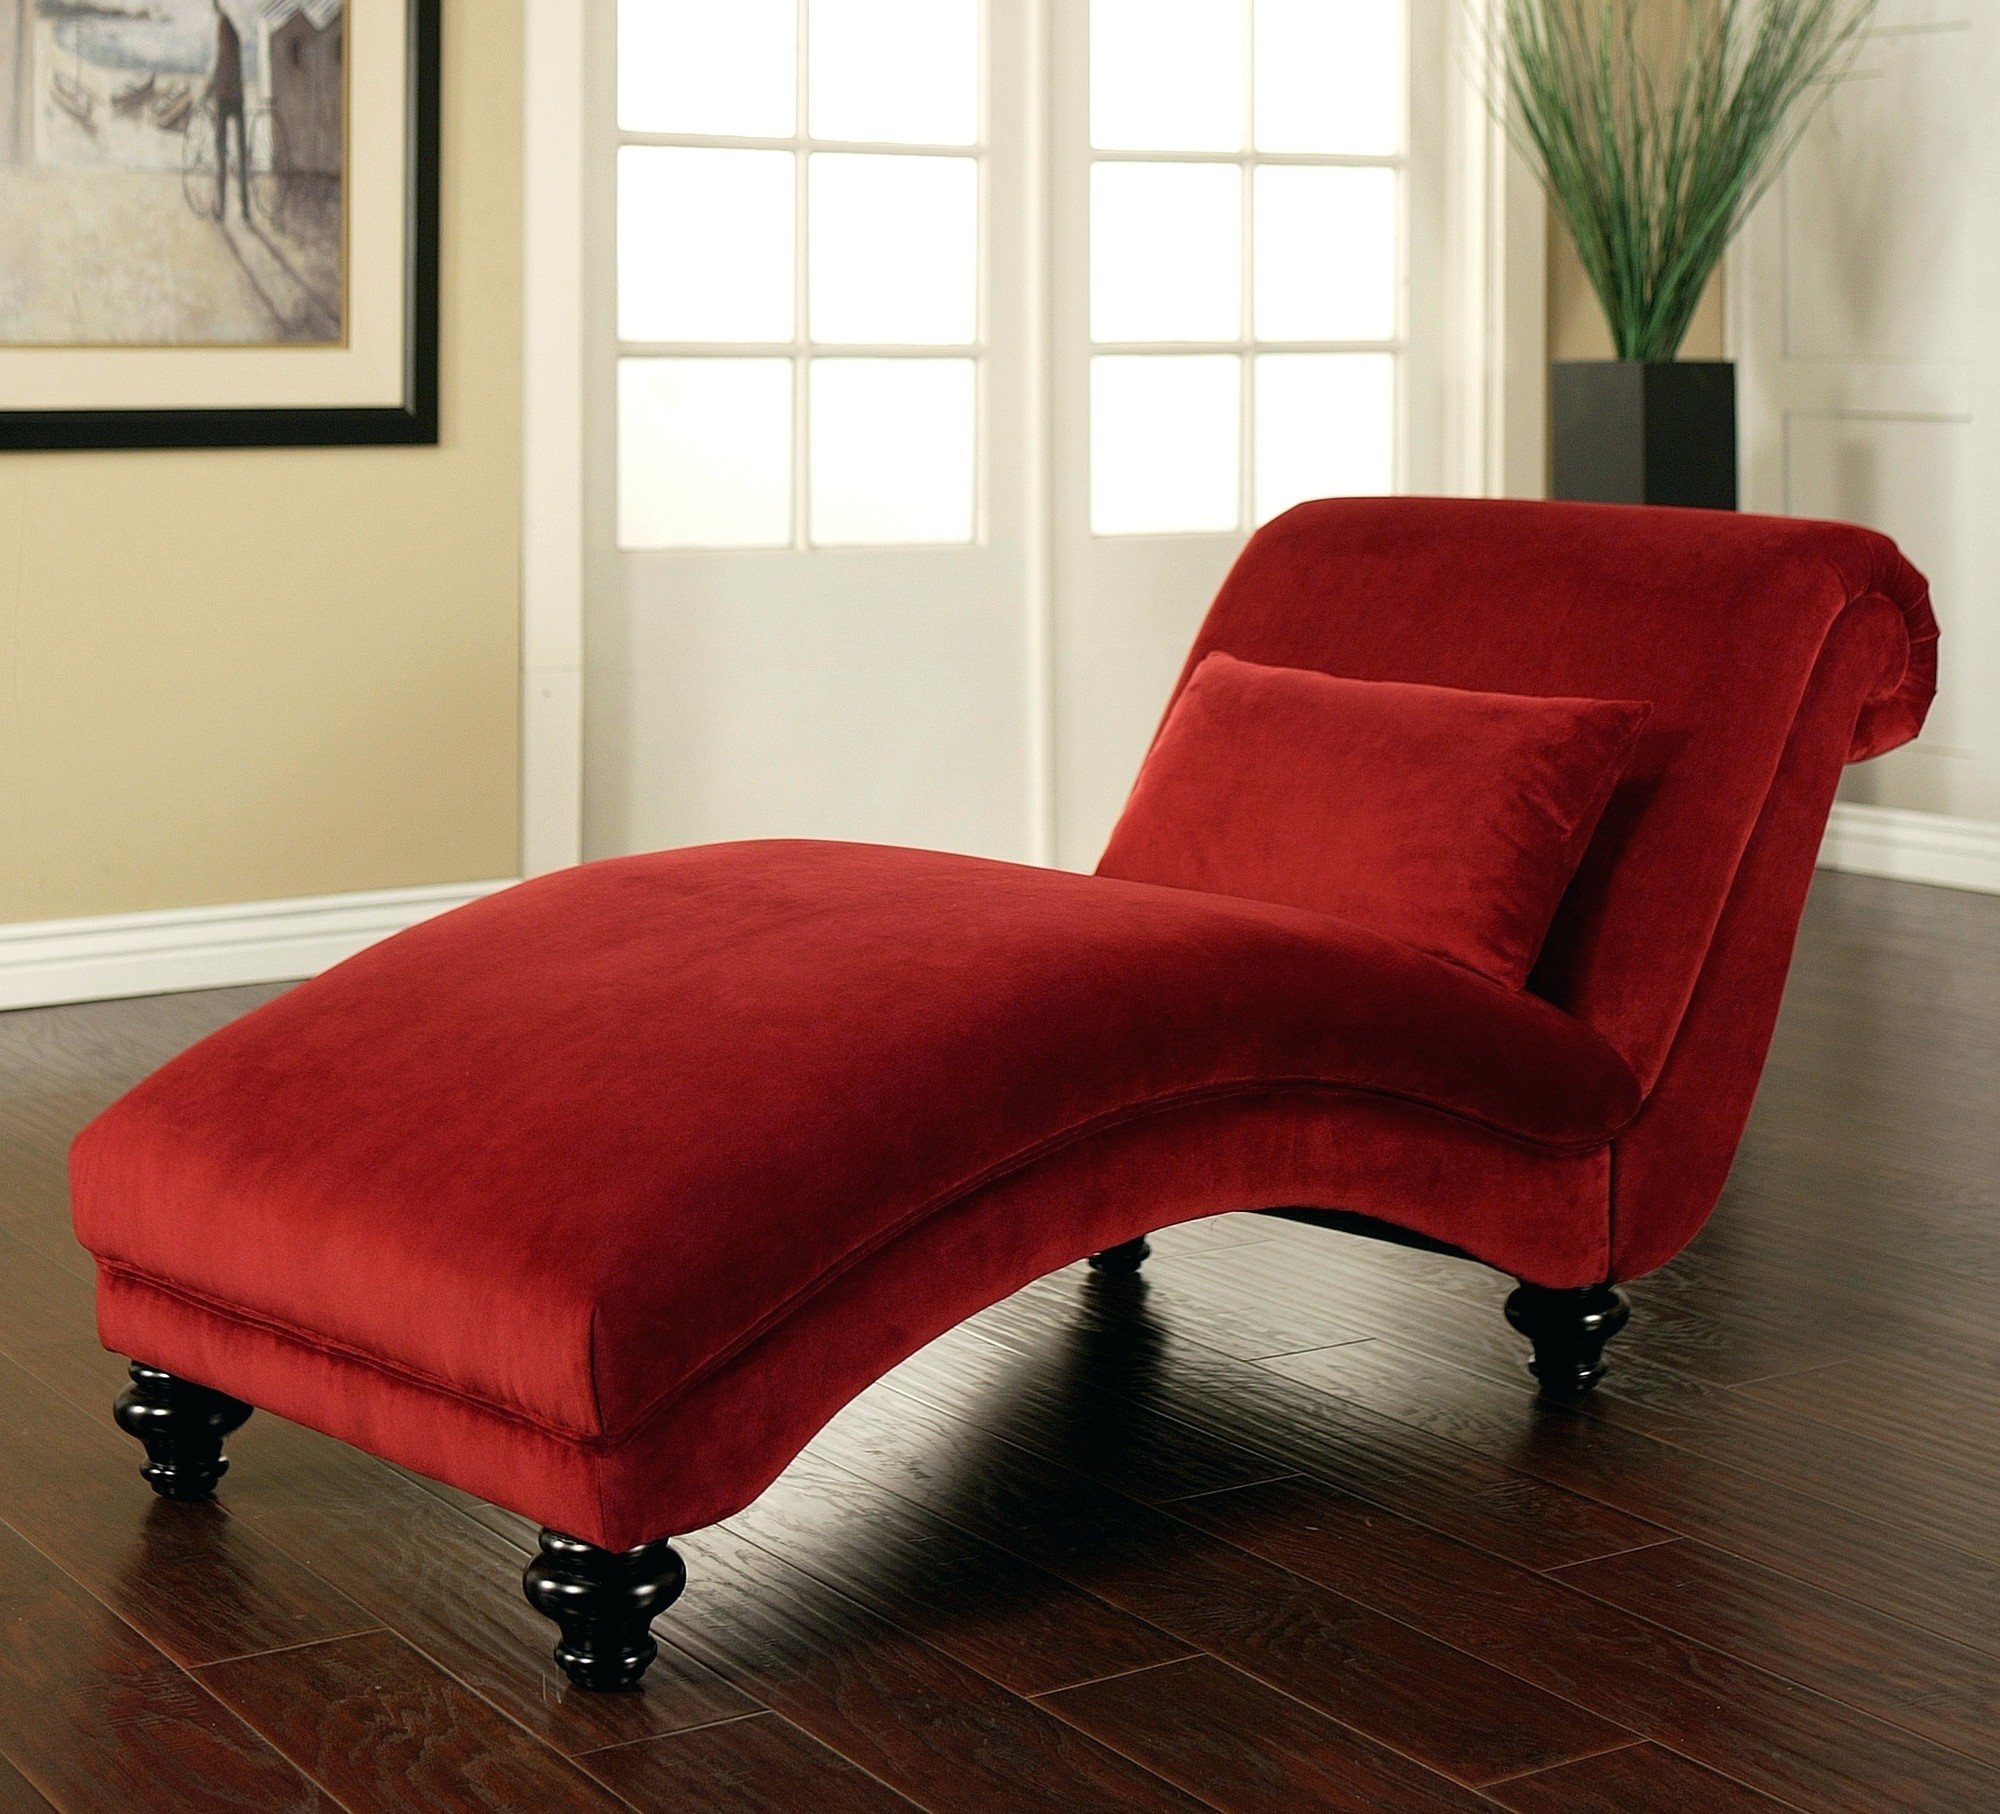 15 best red chaise lounges